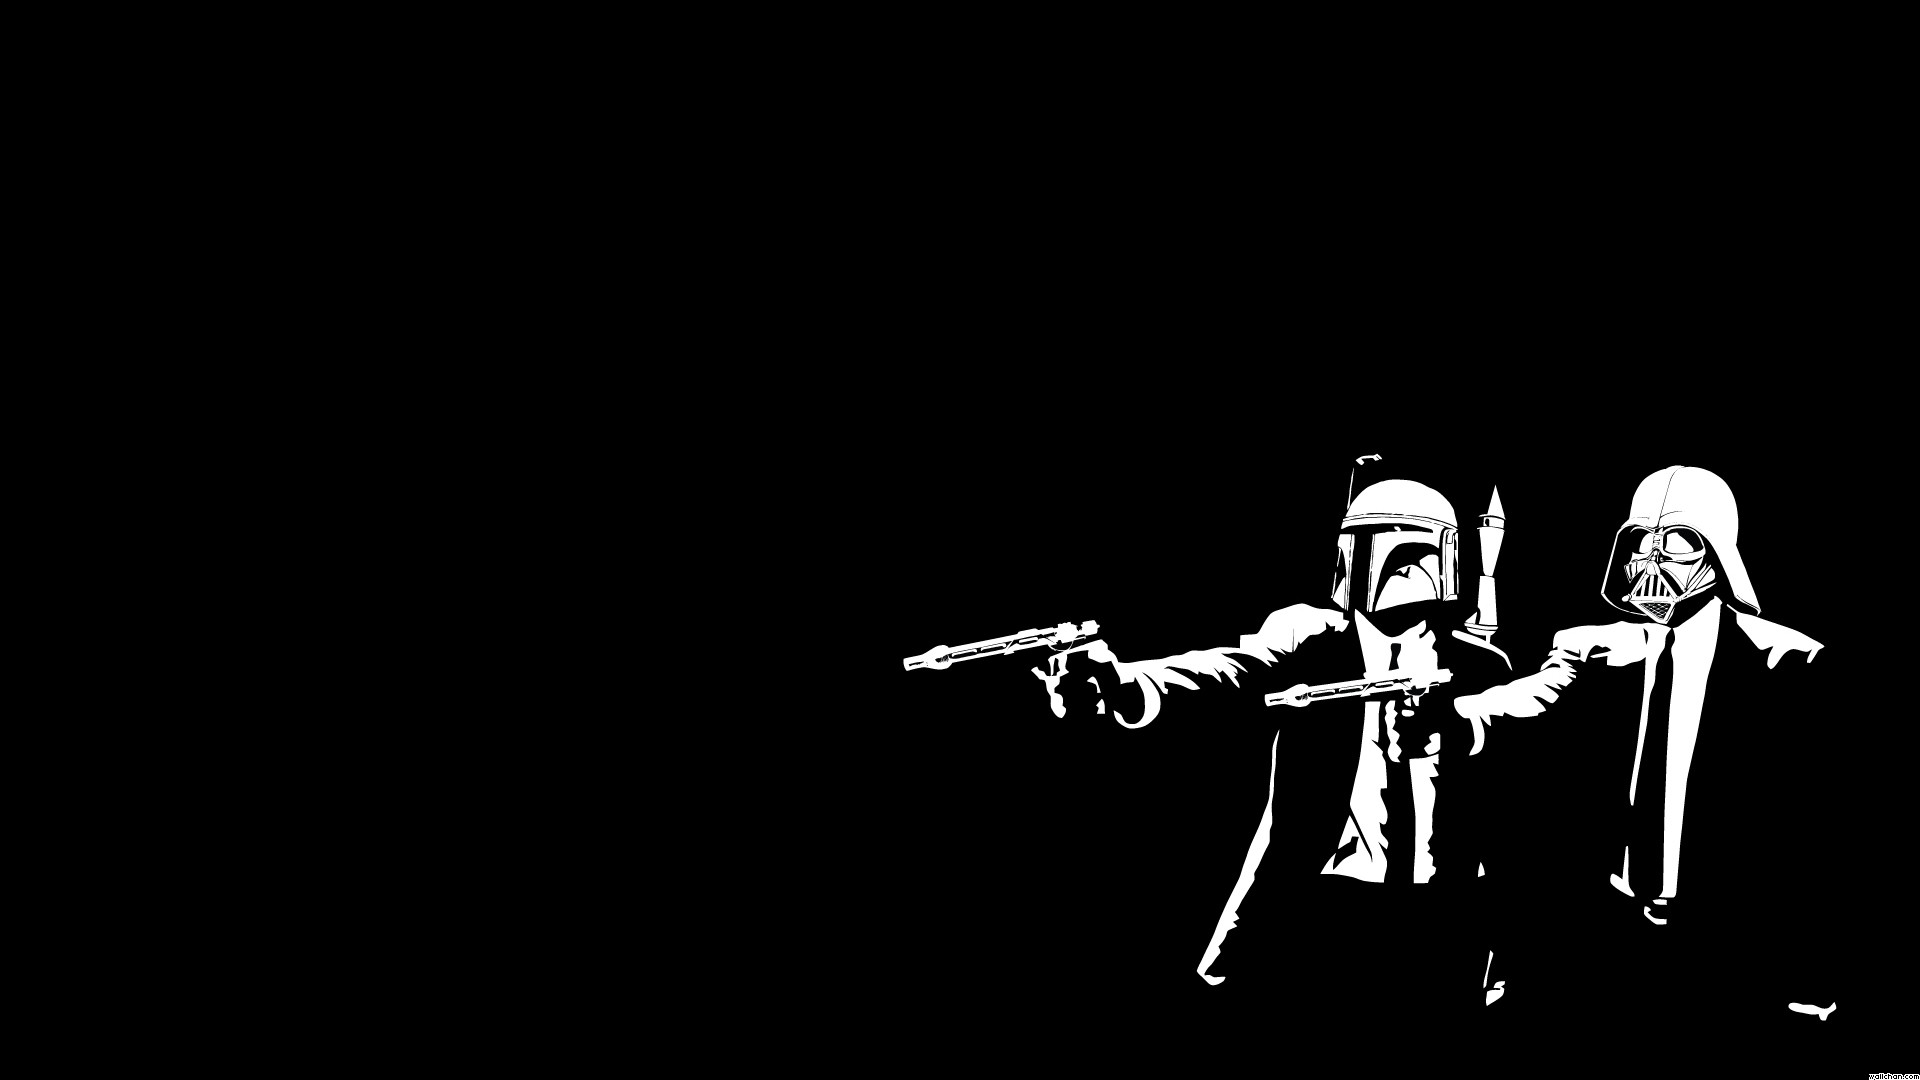 1920x1080 ... Desktop Wallpapers; Custom HDQ Star War Wallpapers and Pictures  (3886319,  px) ...